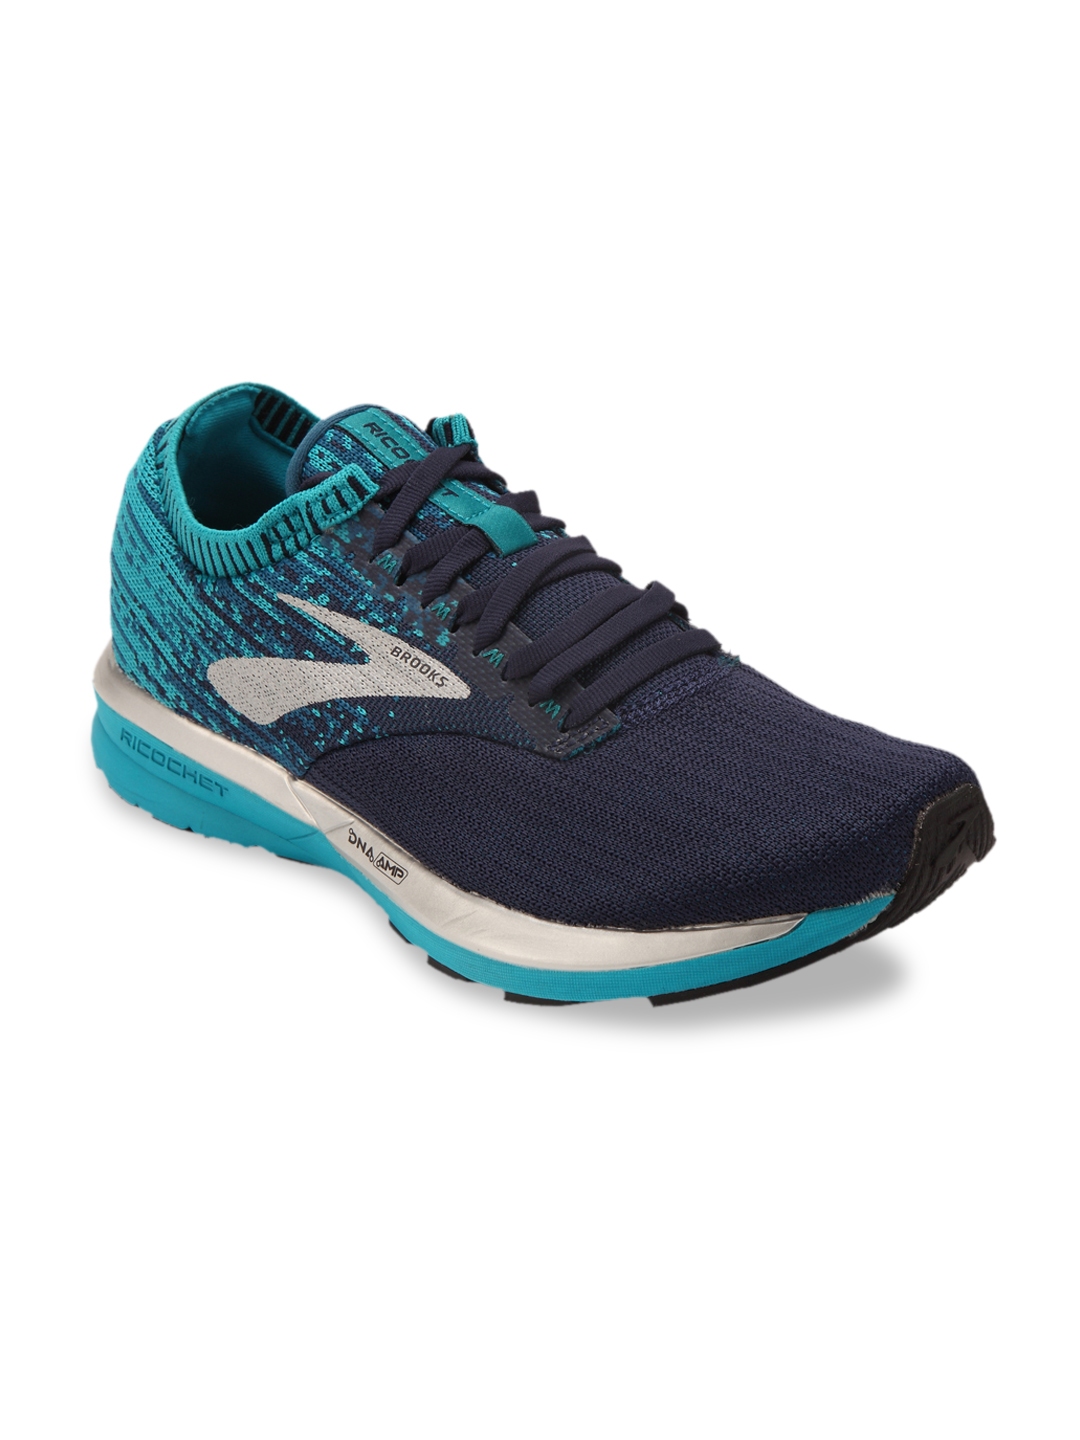 Buy BROOKS Women Navy Blue Ricochet Running Shoes - Sports Shoes for ...